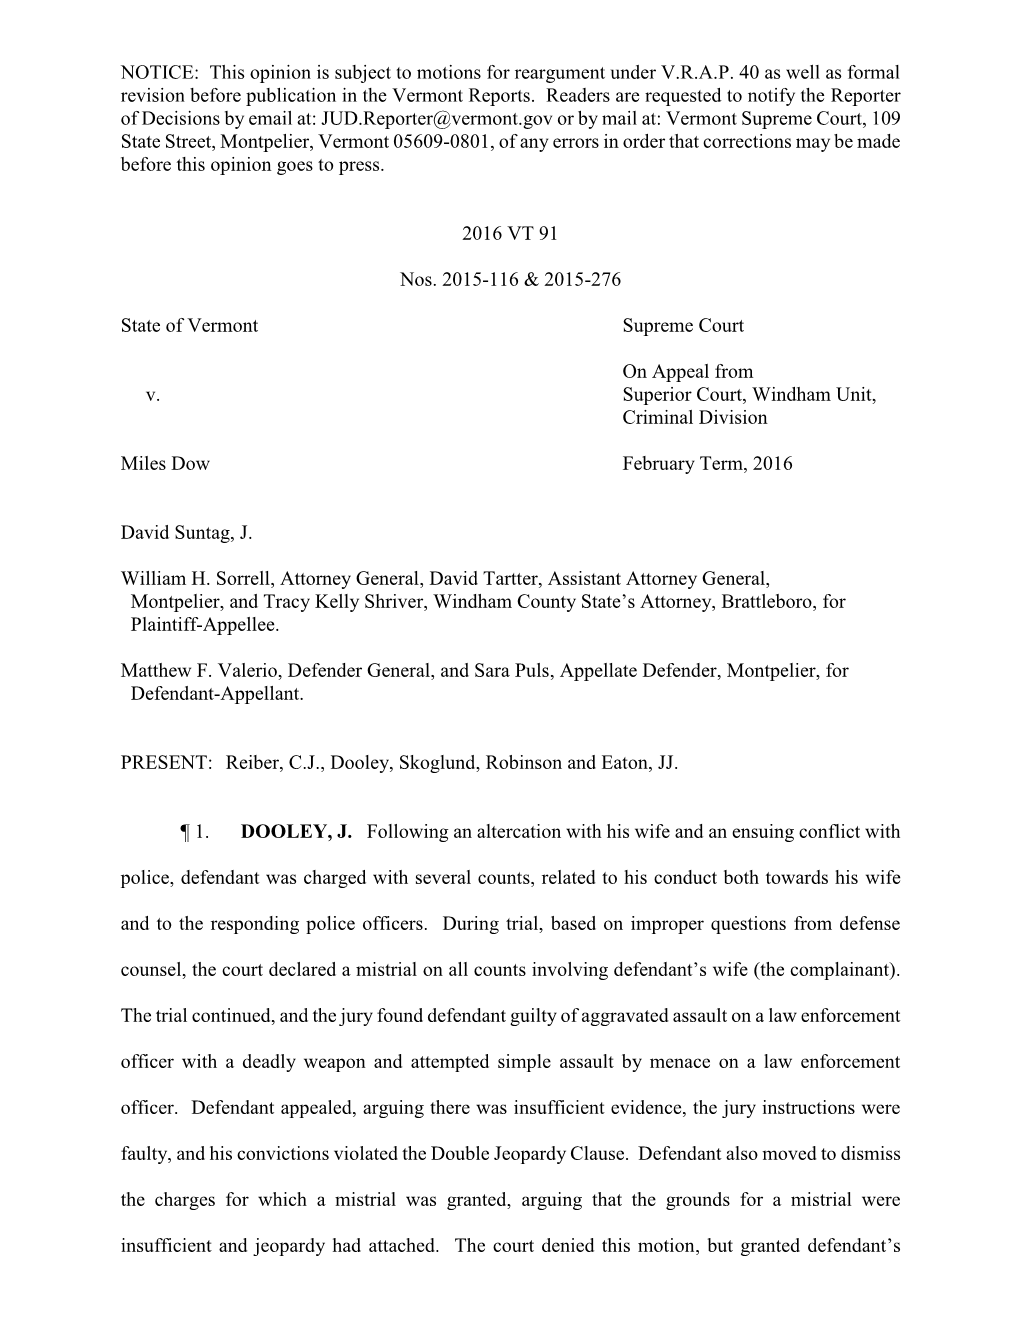 NOTICE: This Opinion Is Subject to Motions for Reargument Under V.R.A.P. 40 As Well As Formal Revision Before Publication in the Vermont Reports